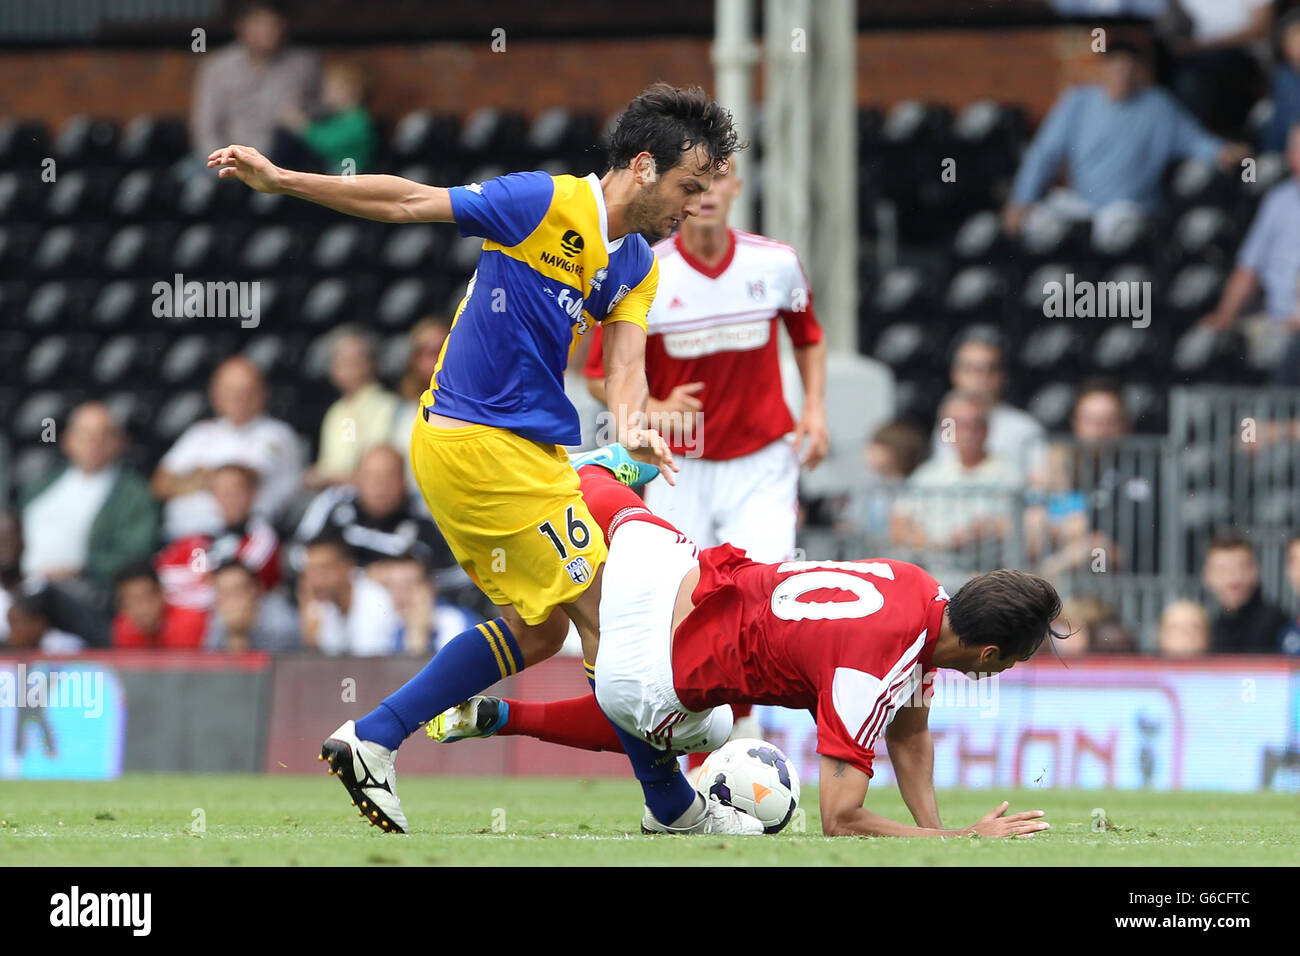 Soccer - Pre-Season Friendly - Fulham v Parma - Craven Cottage. Fulham's Bryan Ruiz (right) and Parma's Marco Parolo battle for the ball Stock Photo